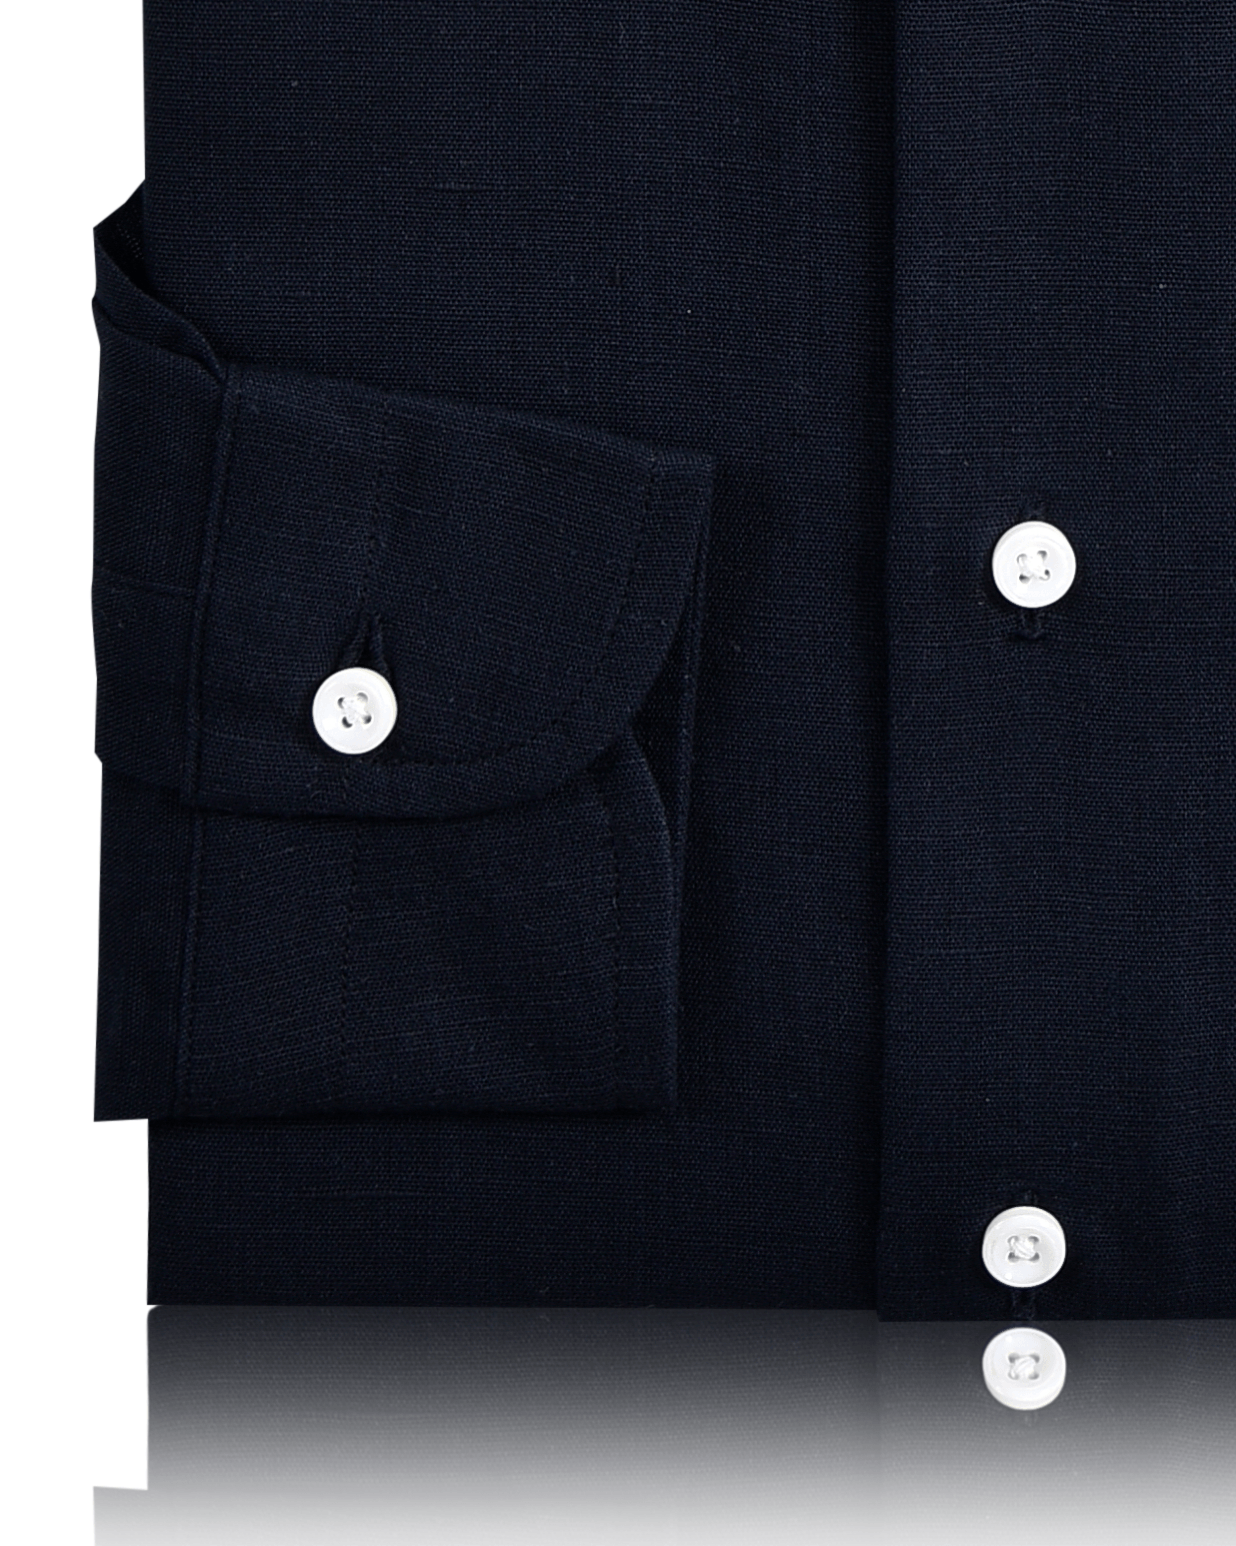 Cuff of the custom linen shirt for men in navy blue by Luxire Clothing